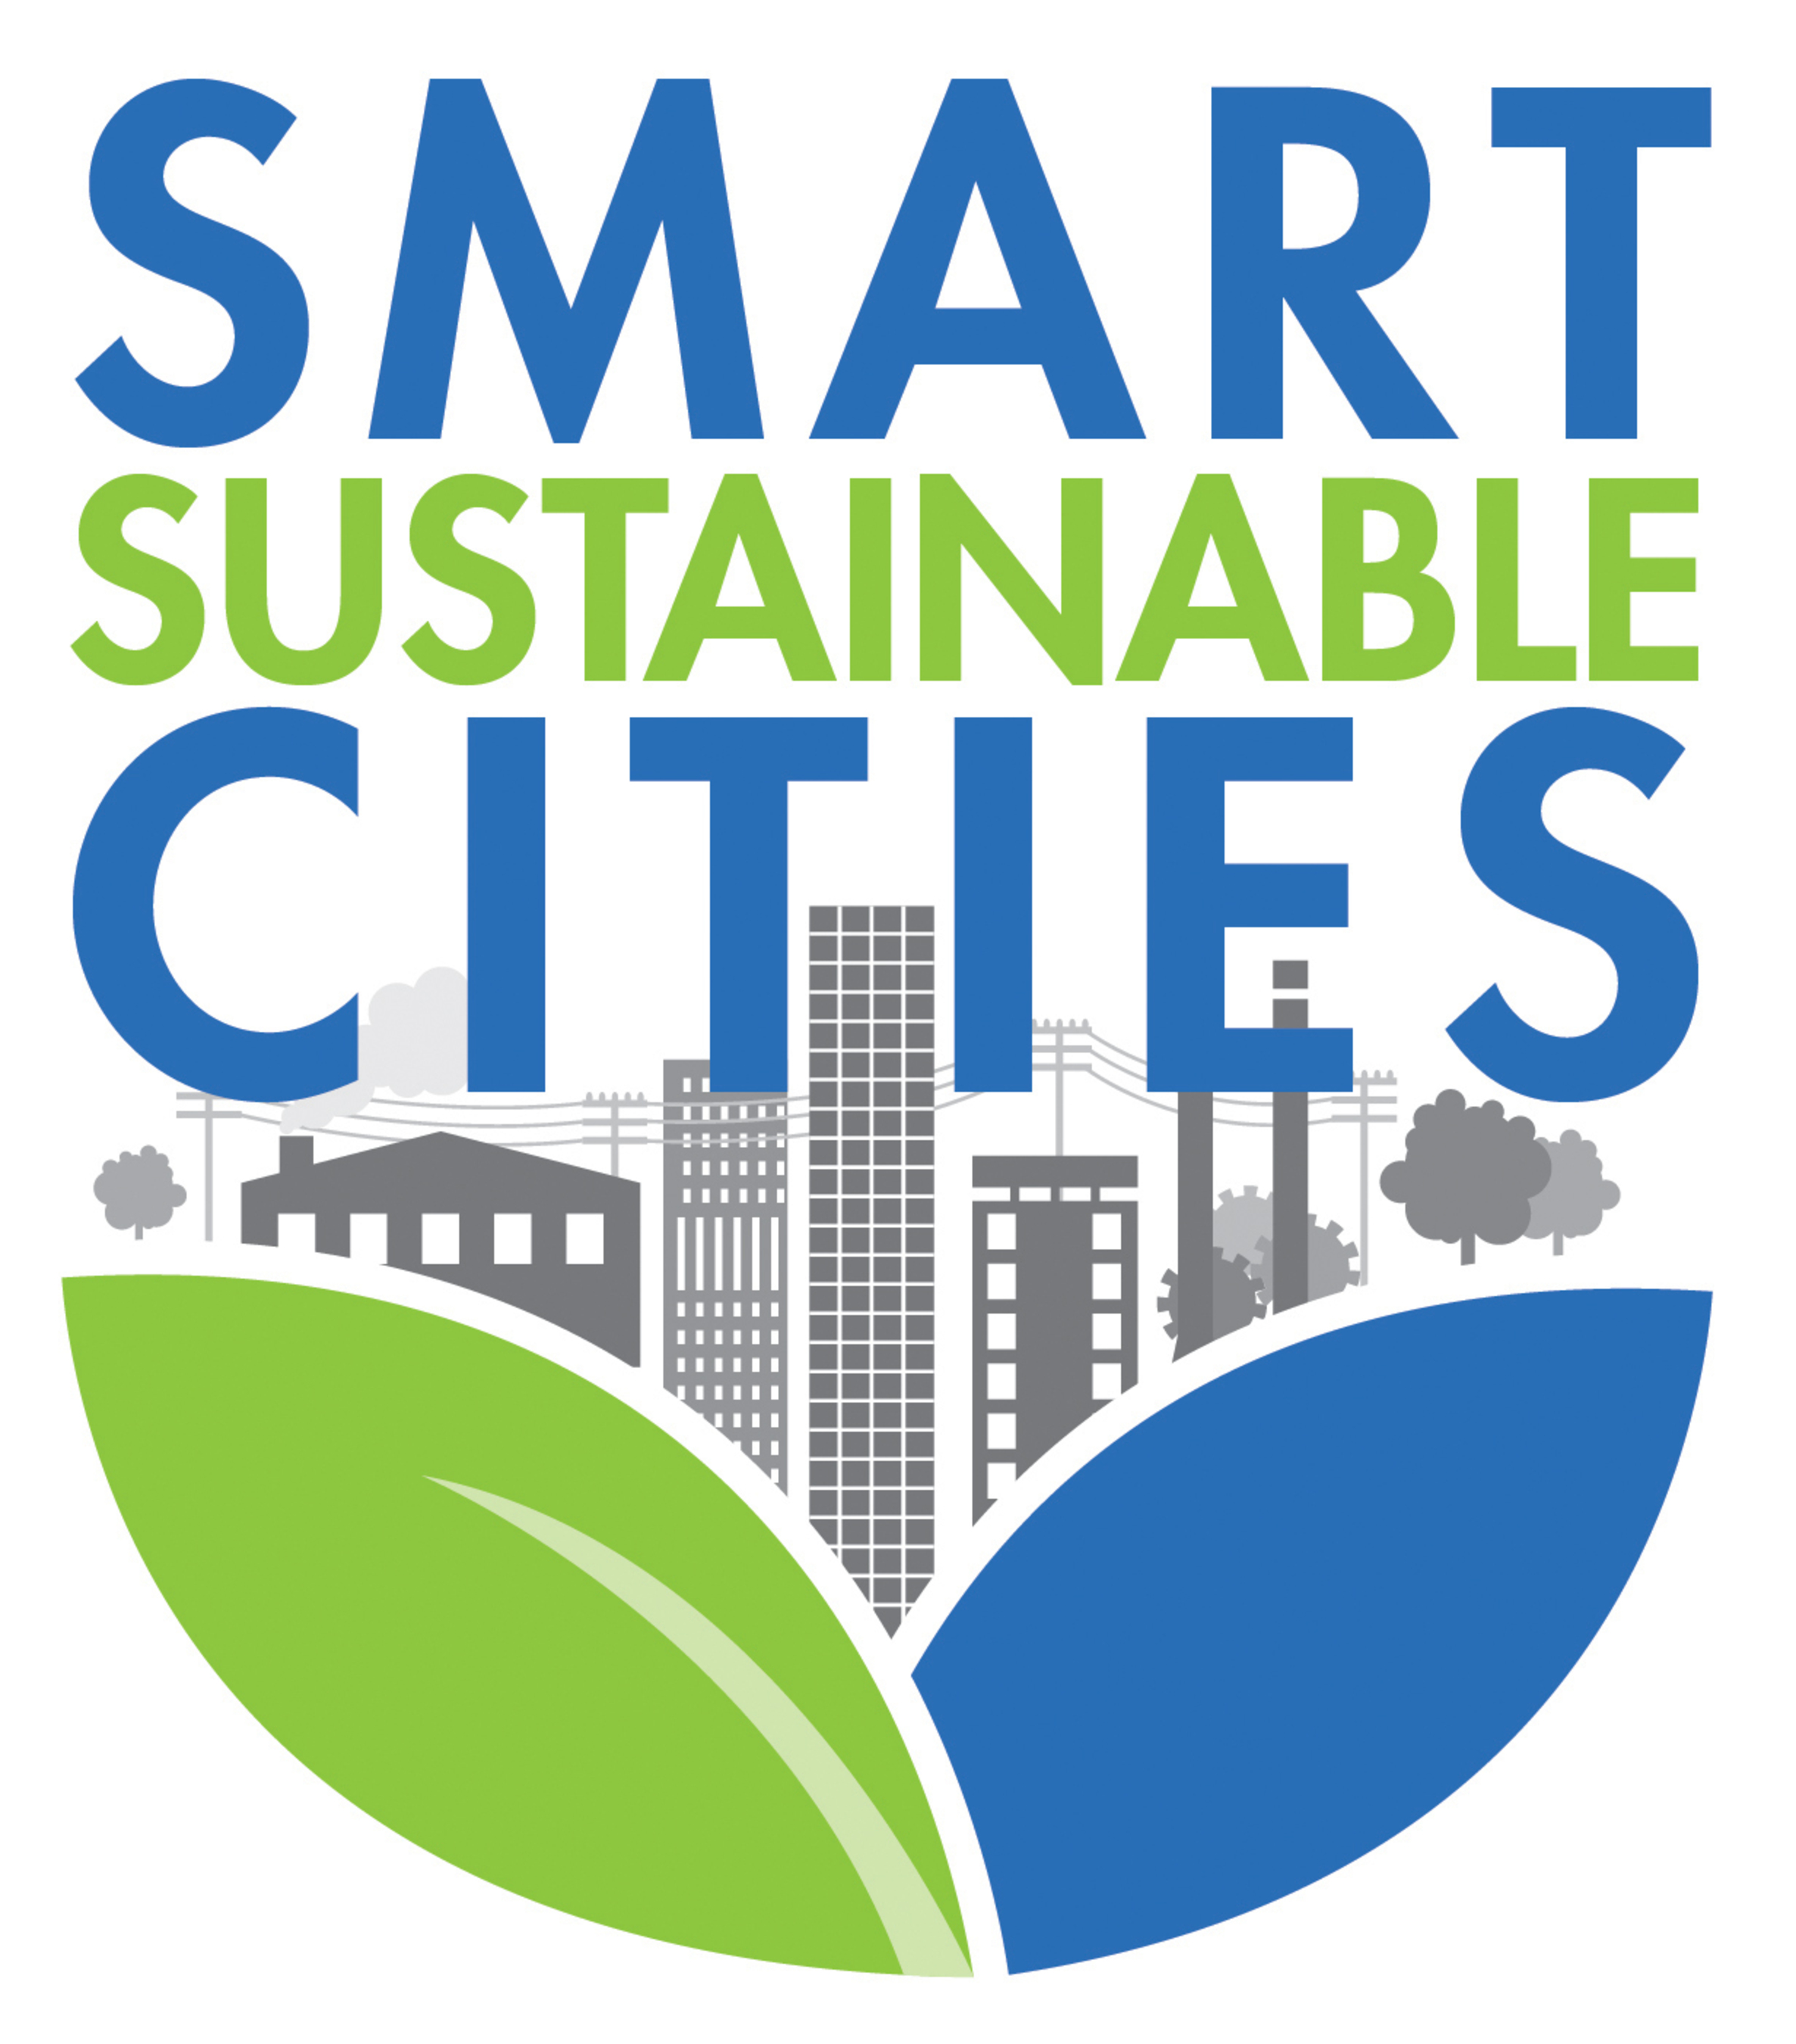 The American National Standards Institute (ANSI) is pleased to announce the establishment of the ANSI Network for Smart and Sustainable Cities (ANSSC).